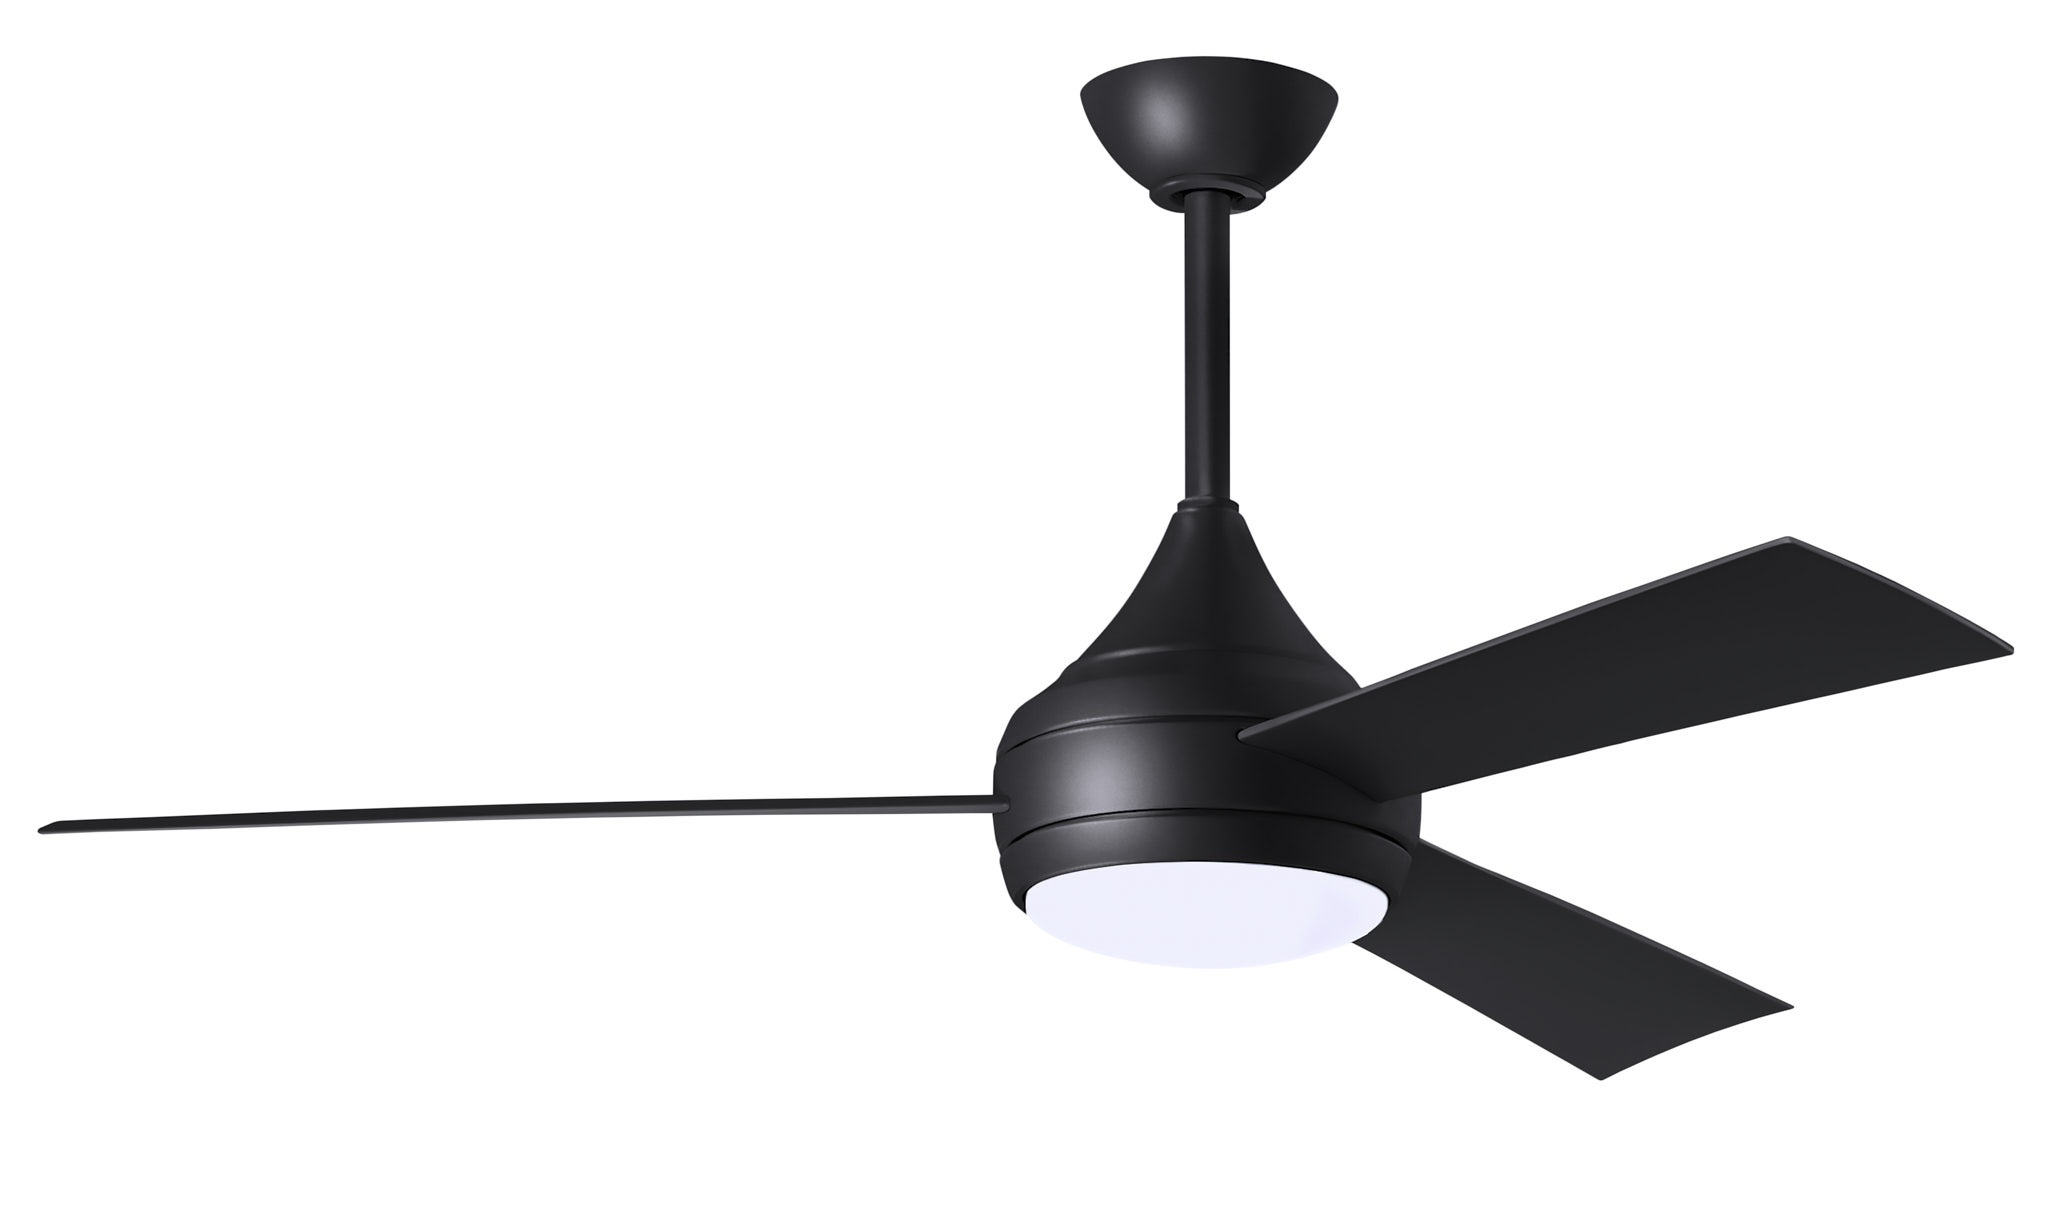 Donaire ceiling fan in Matte Black with Black blades without light cap manufactured by Matthews Fan Company.